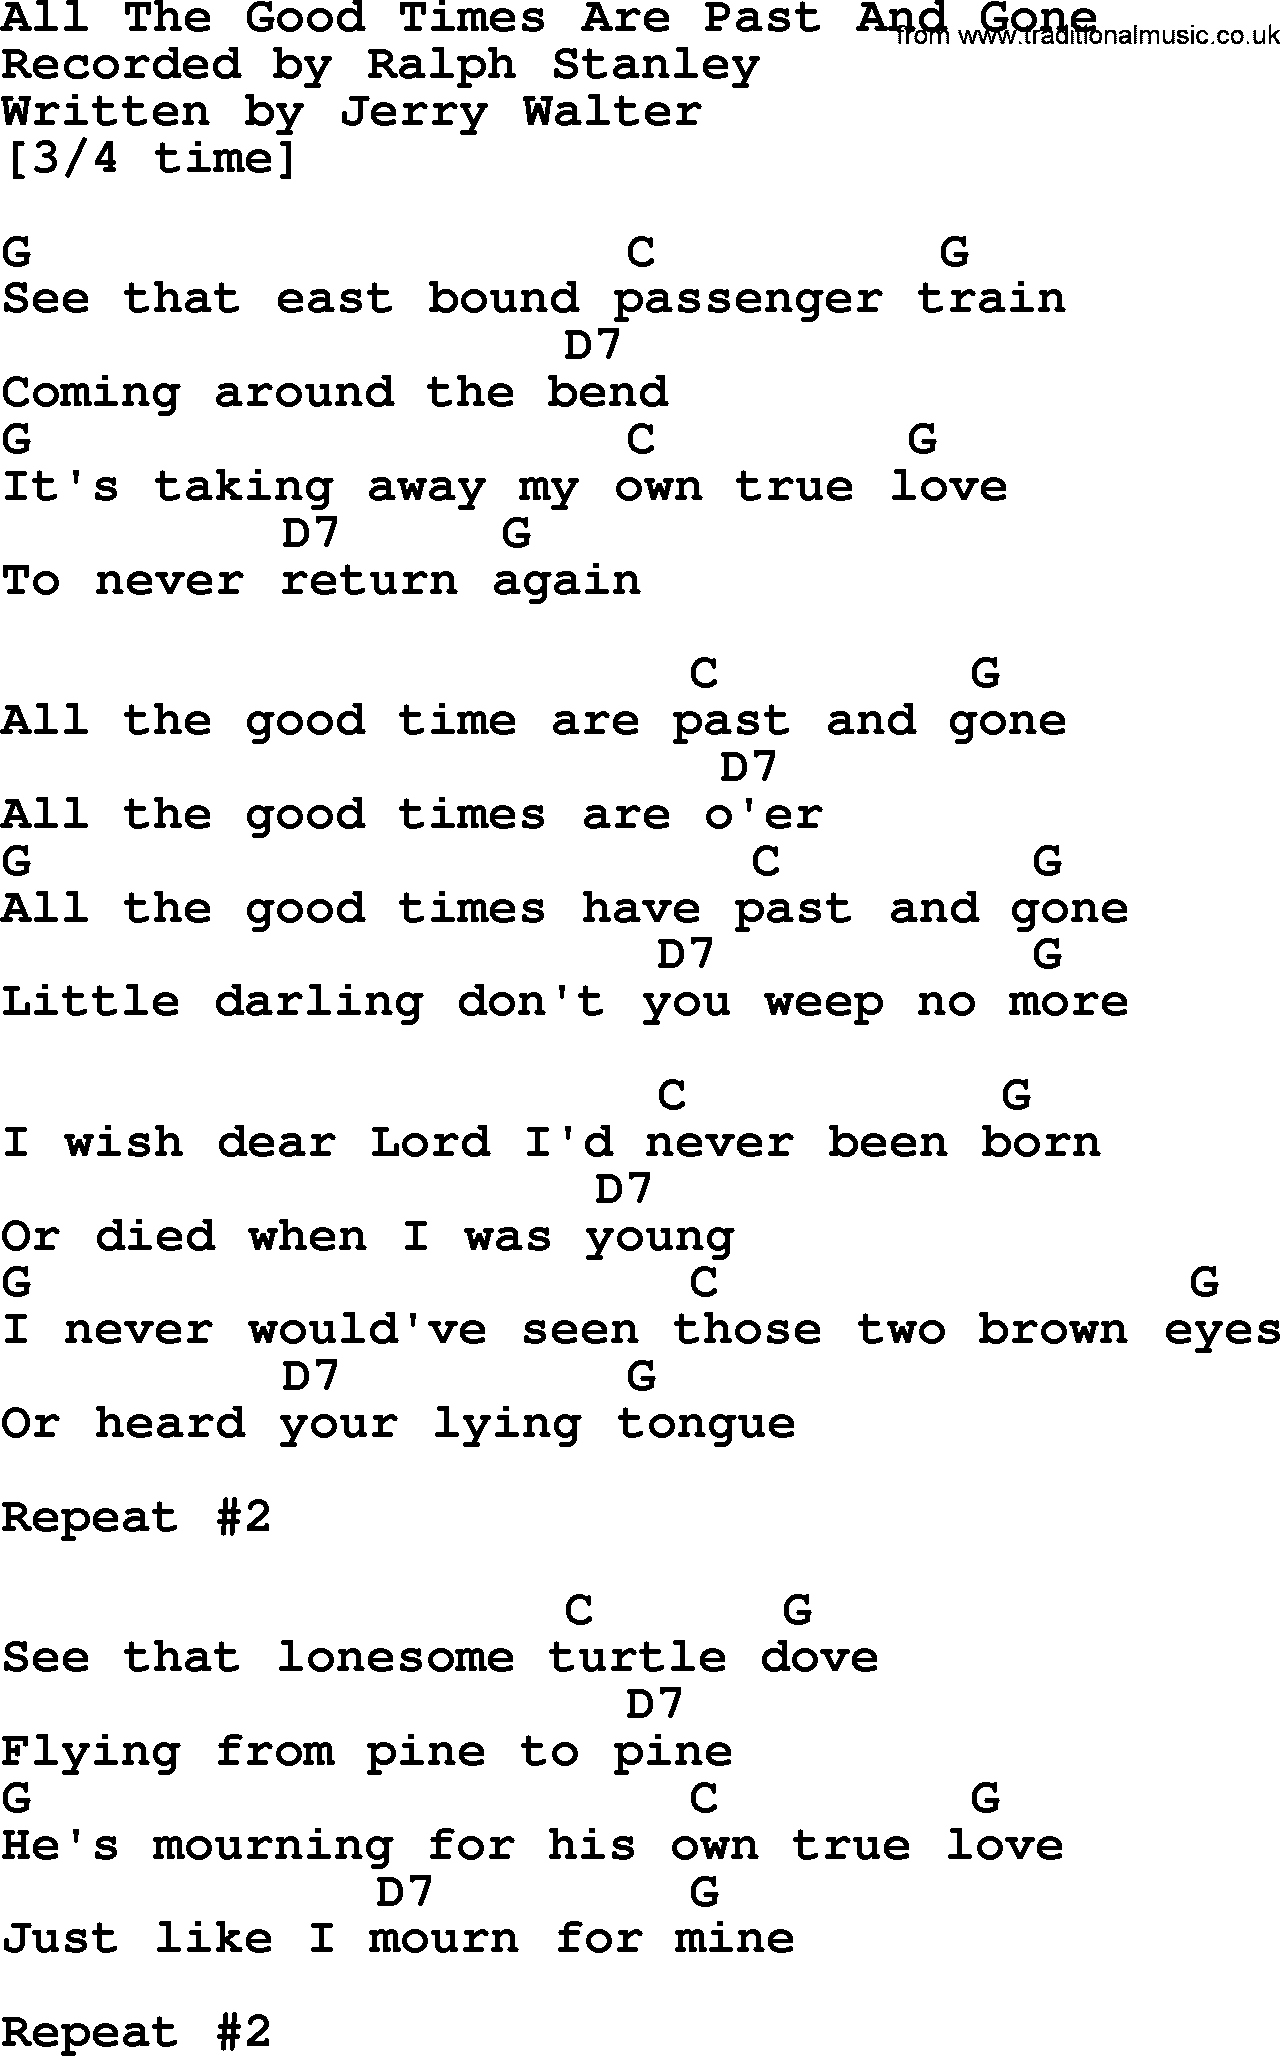 Bluegrass song: All The Good Times Are Past And Gone, lyrics and chords